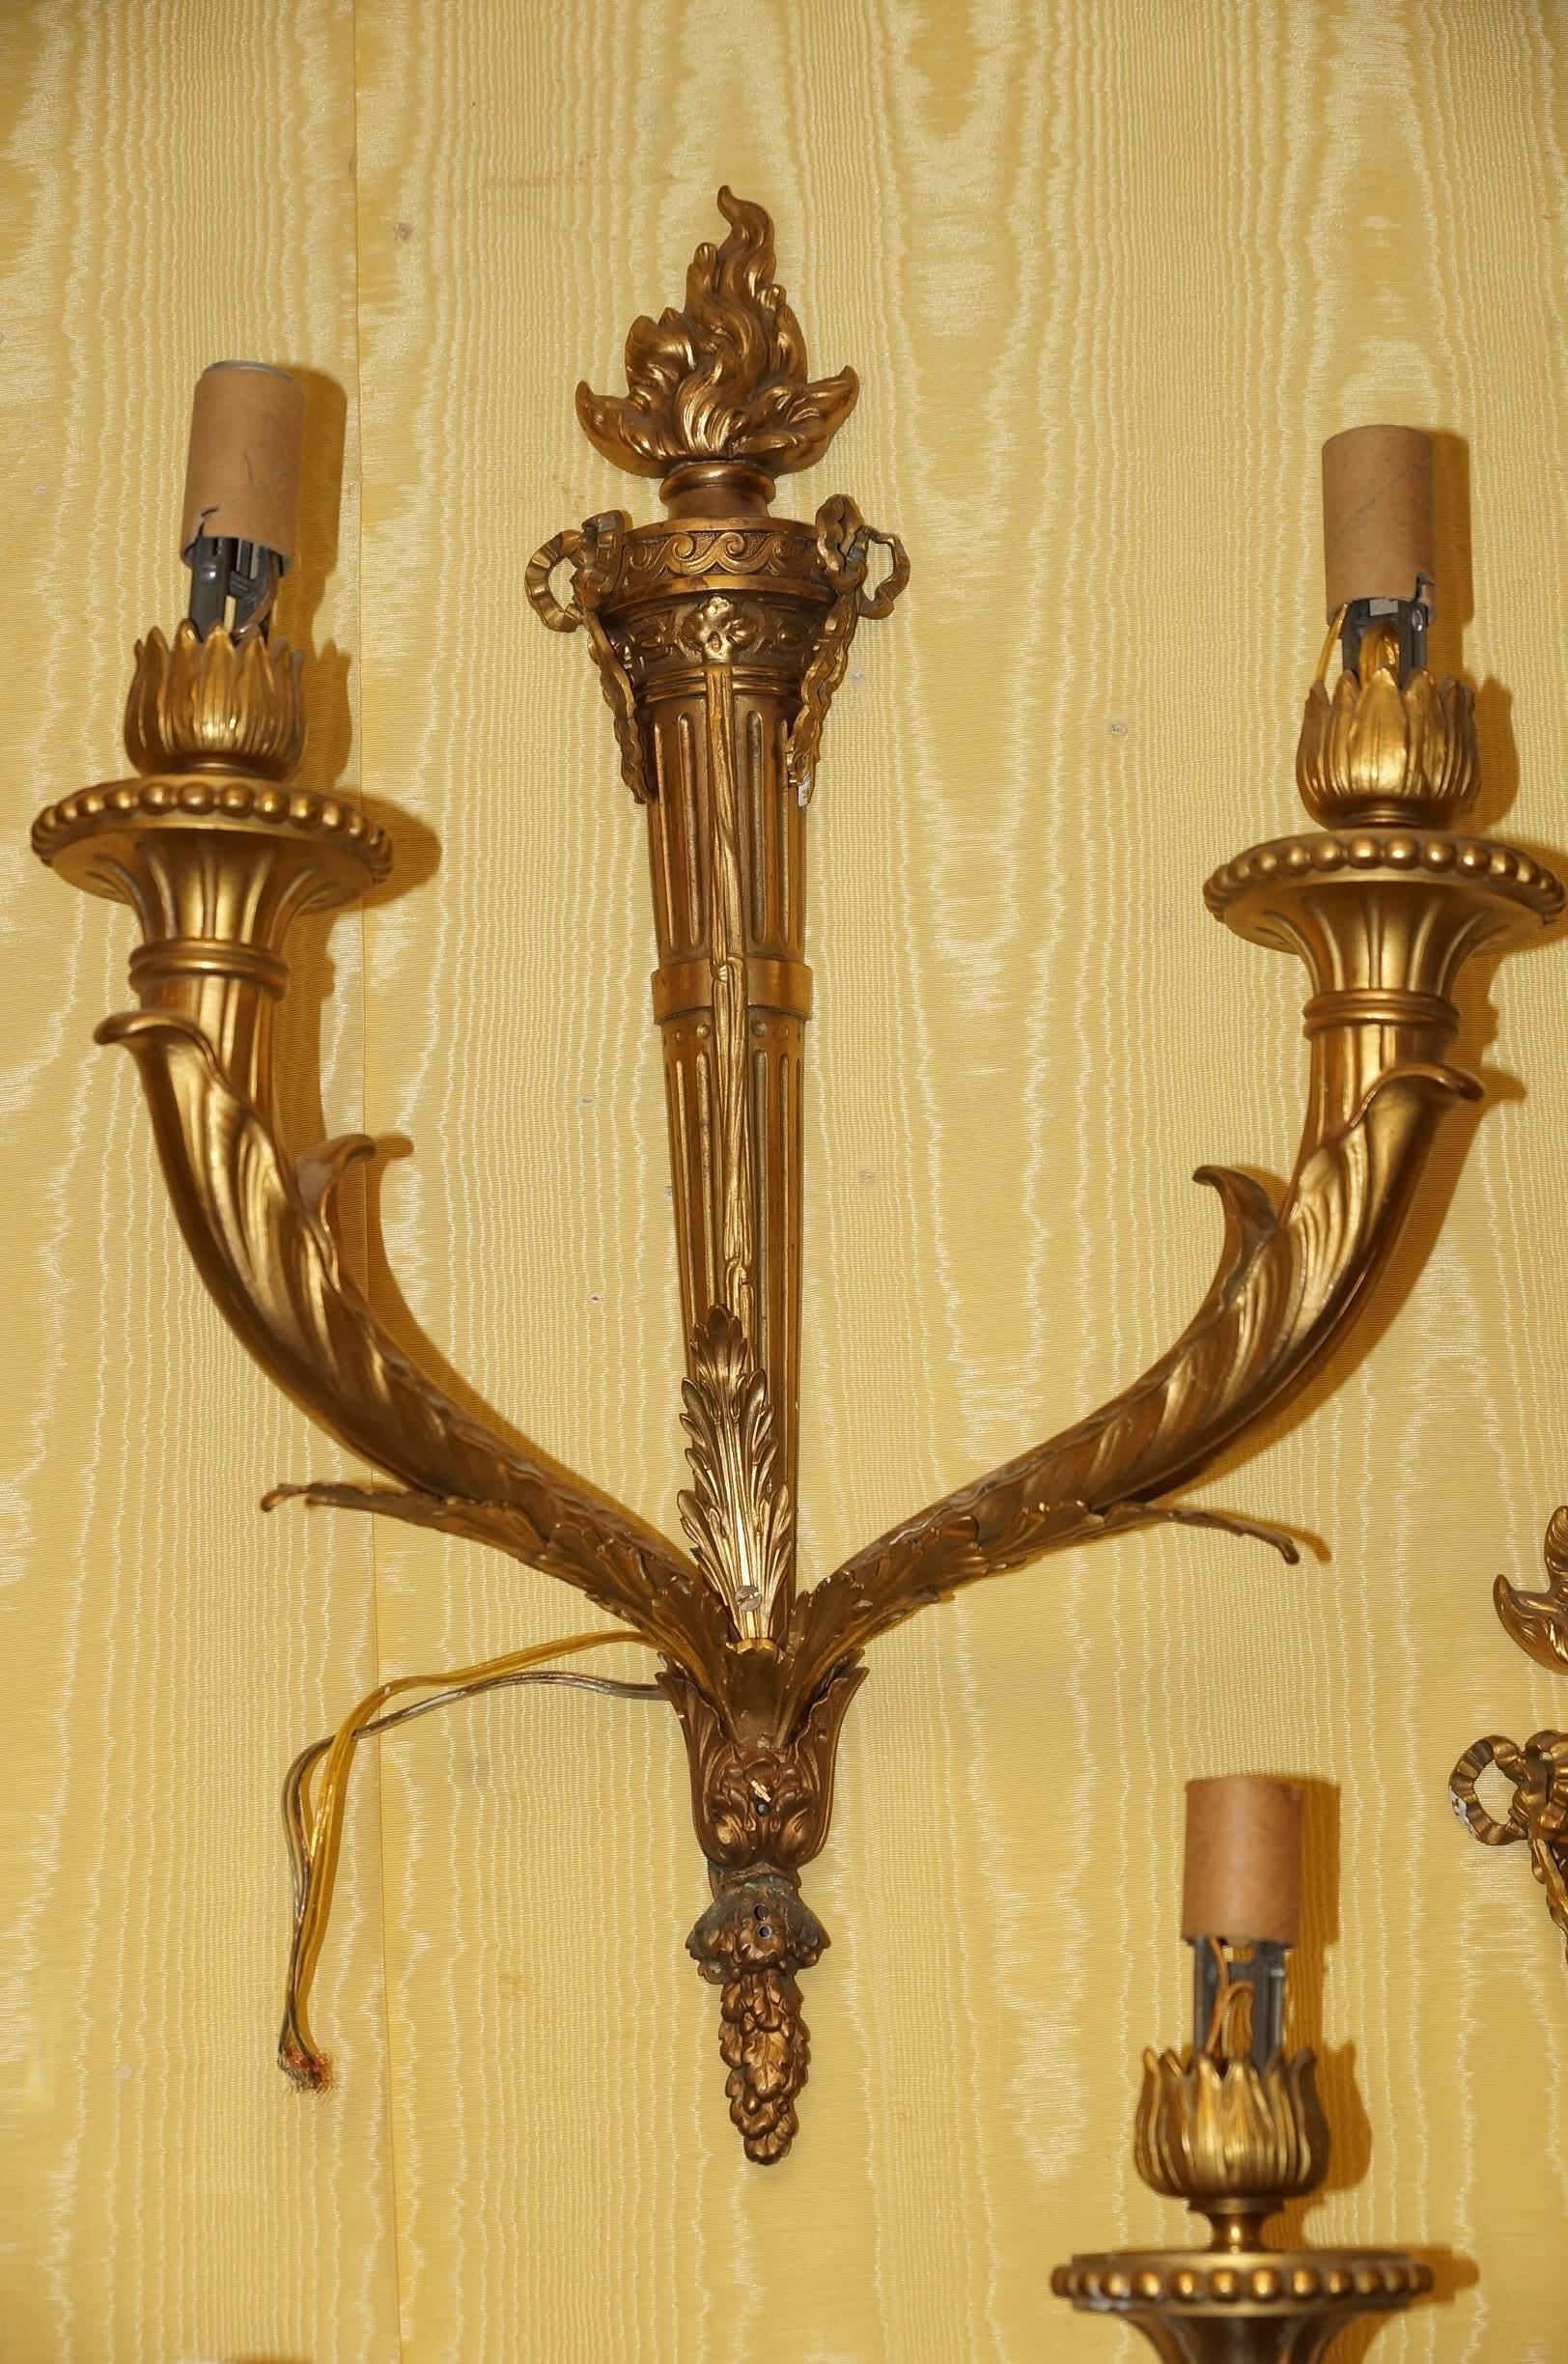 Pair of two-light torch-form sconces in the Louis XV style, with sockets and wiring, ready for use.